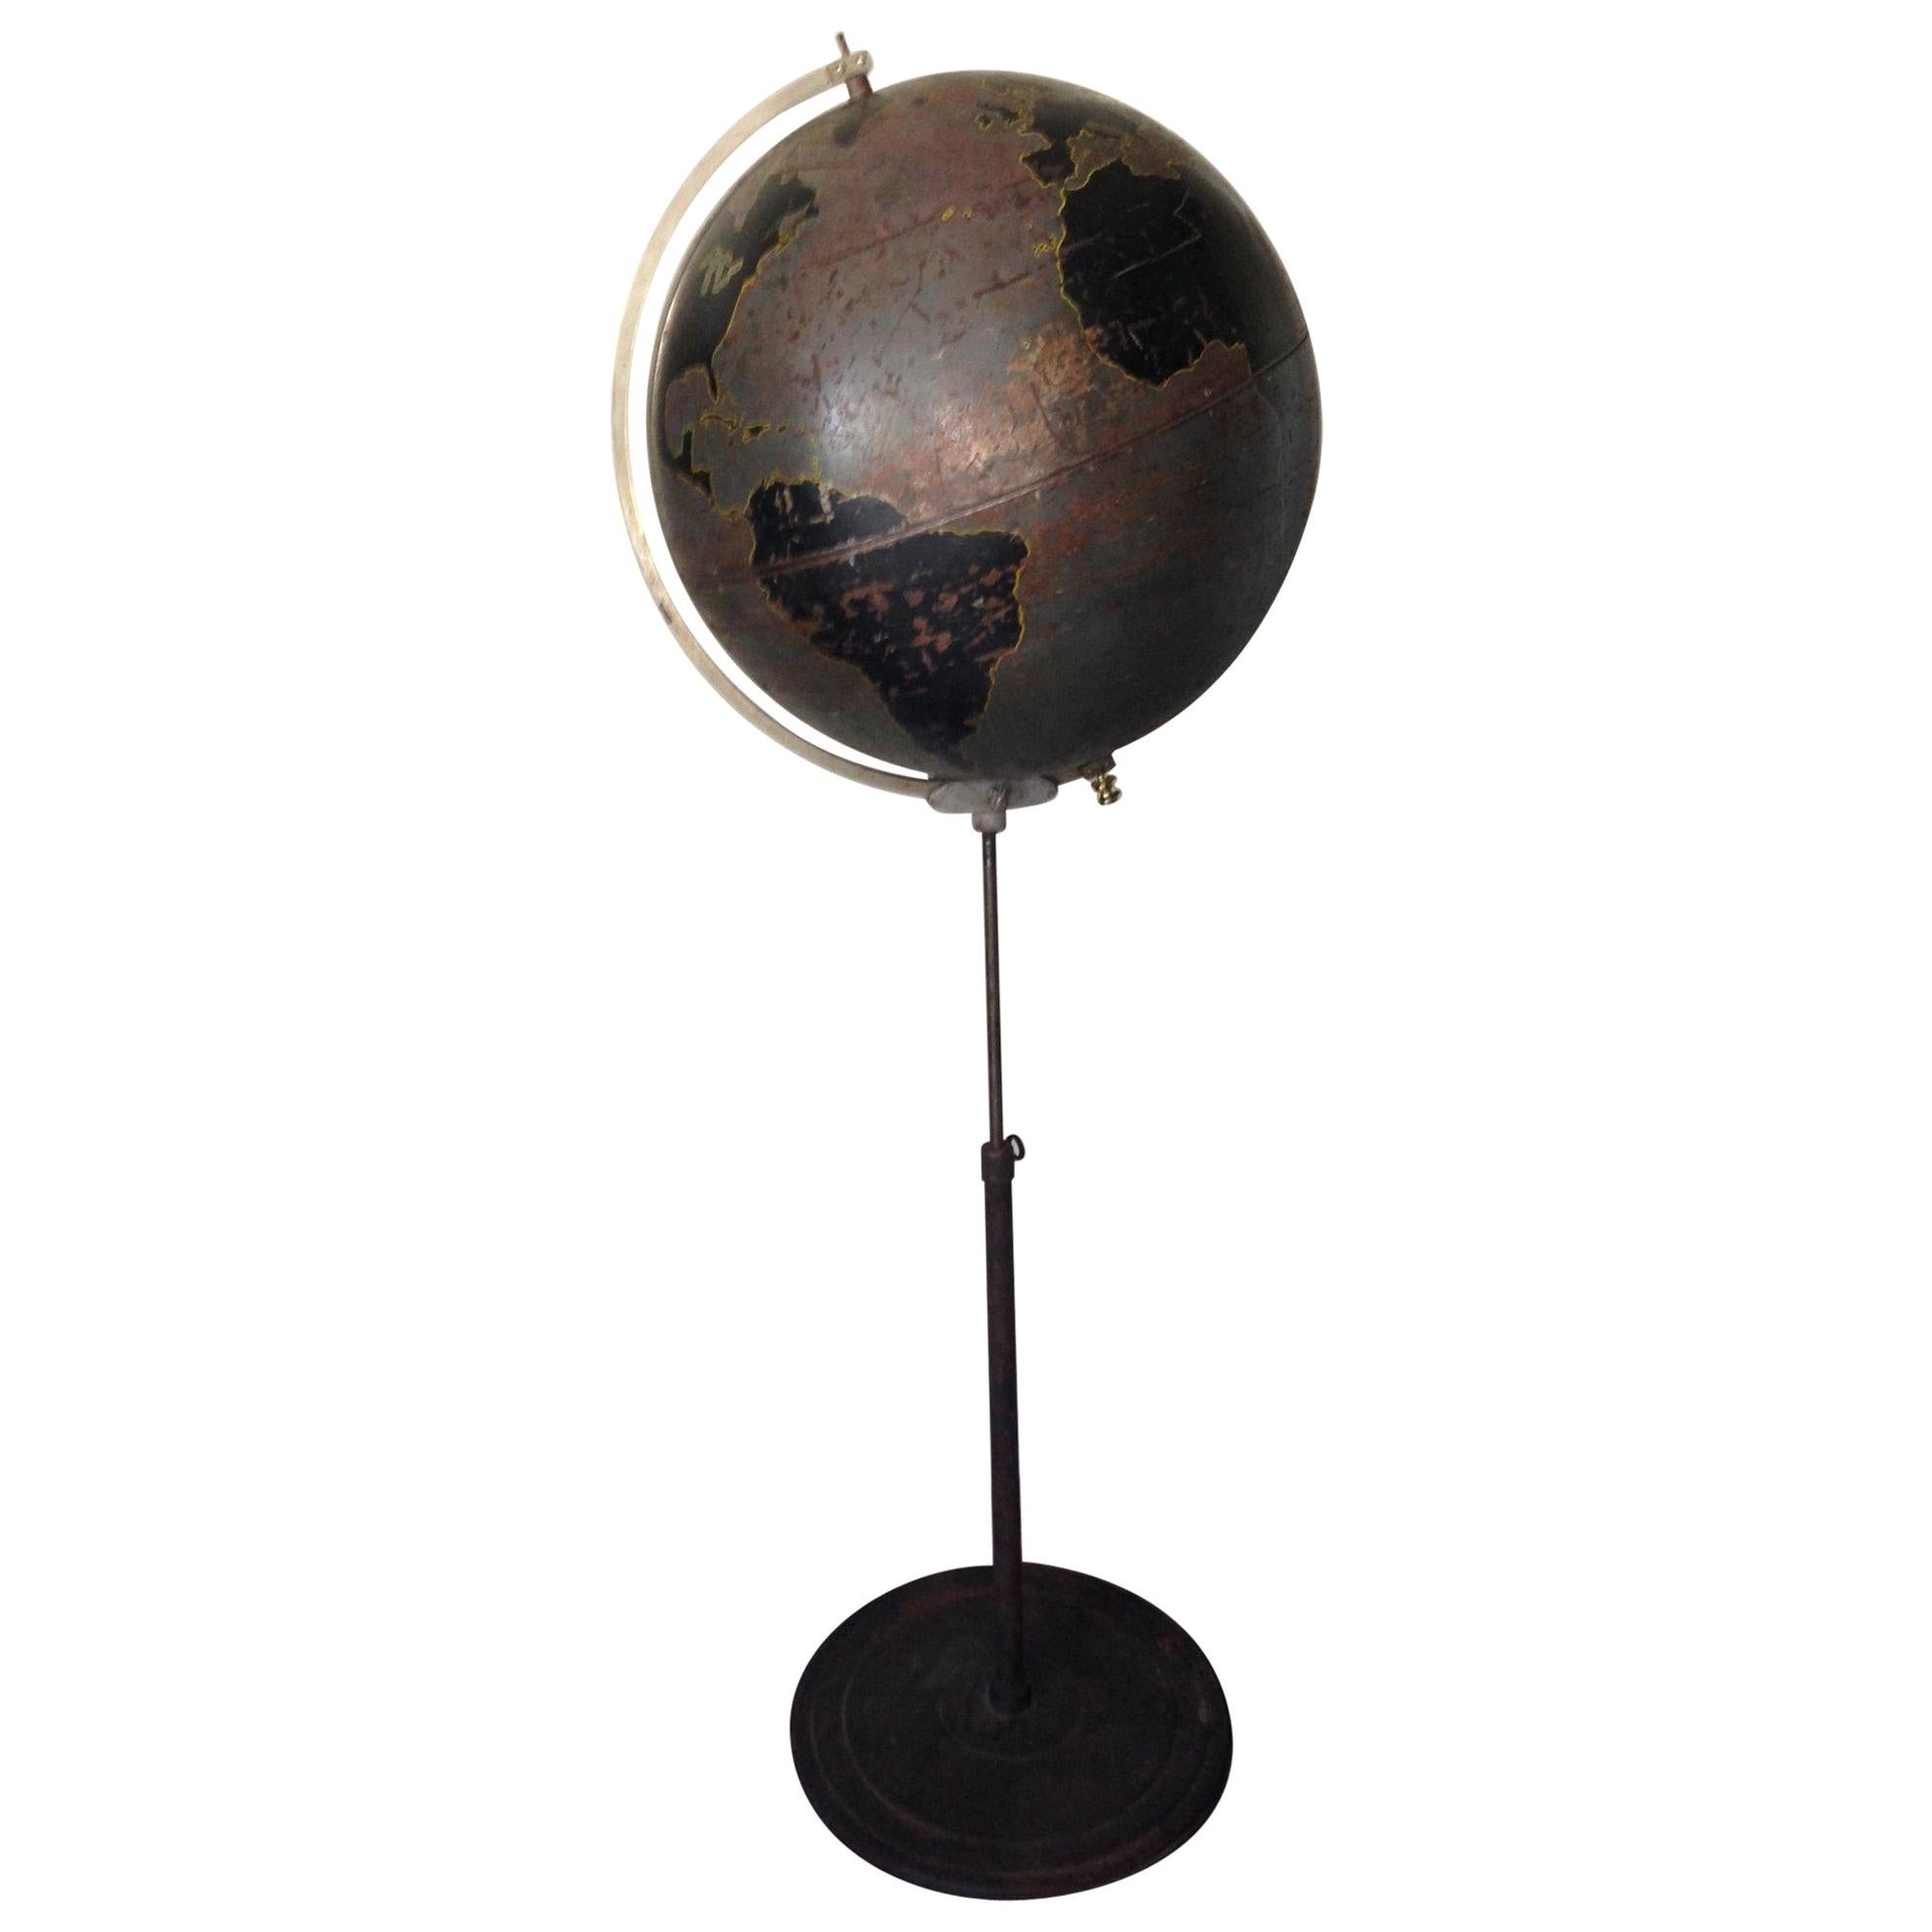 Globe by Denoyer Geppert Used for Military Aviation Training, circa 1920s